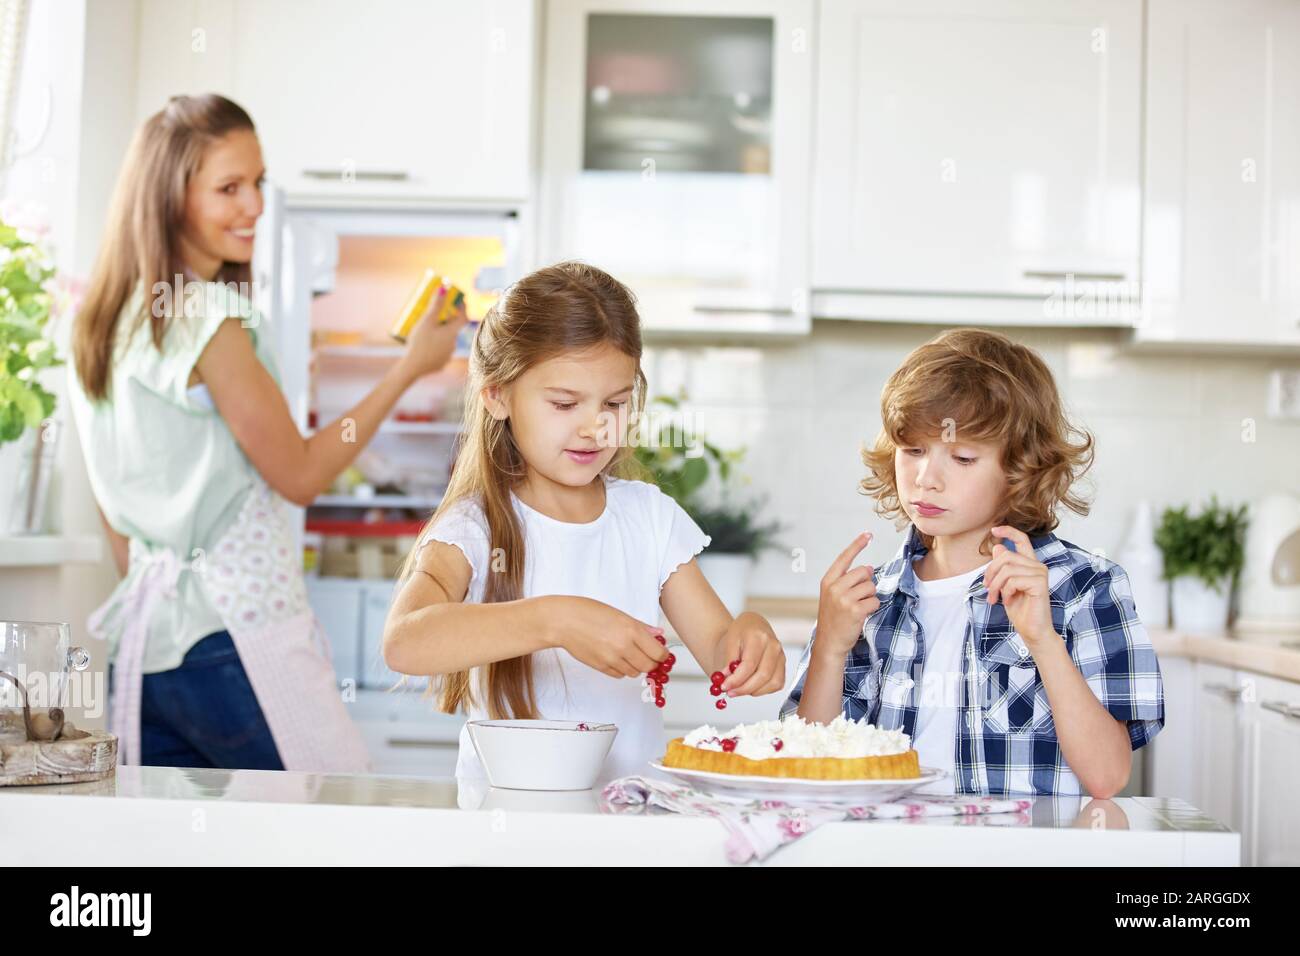 two children bake a cake together with their mother in the kitchen Stock Photo